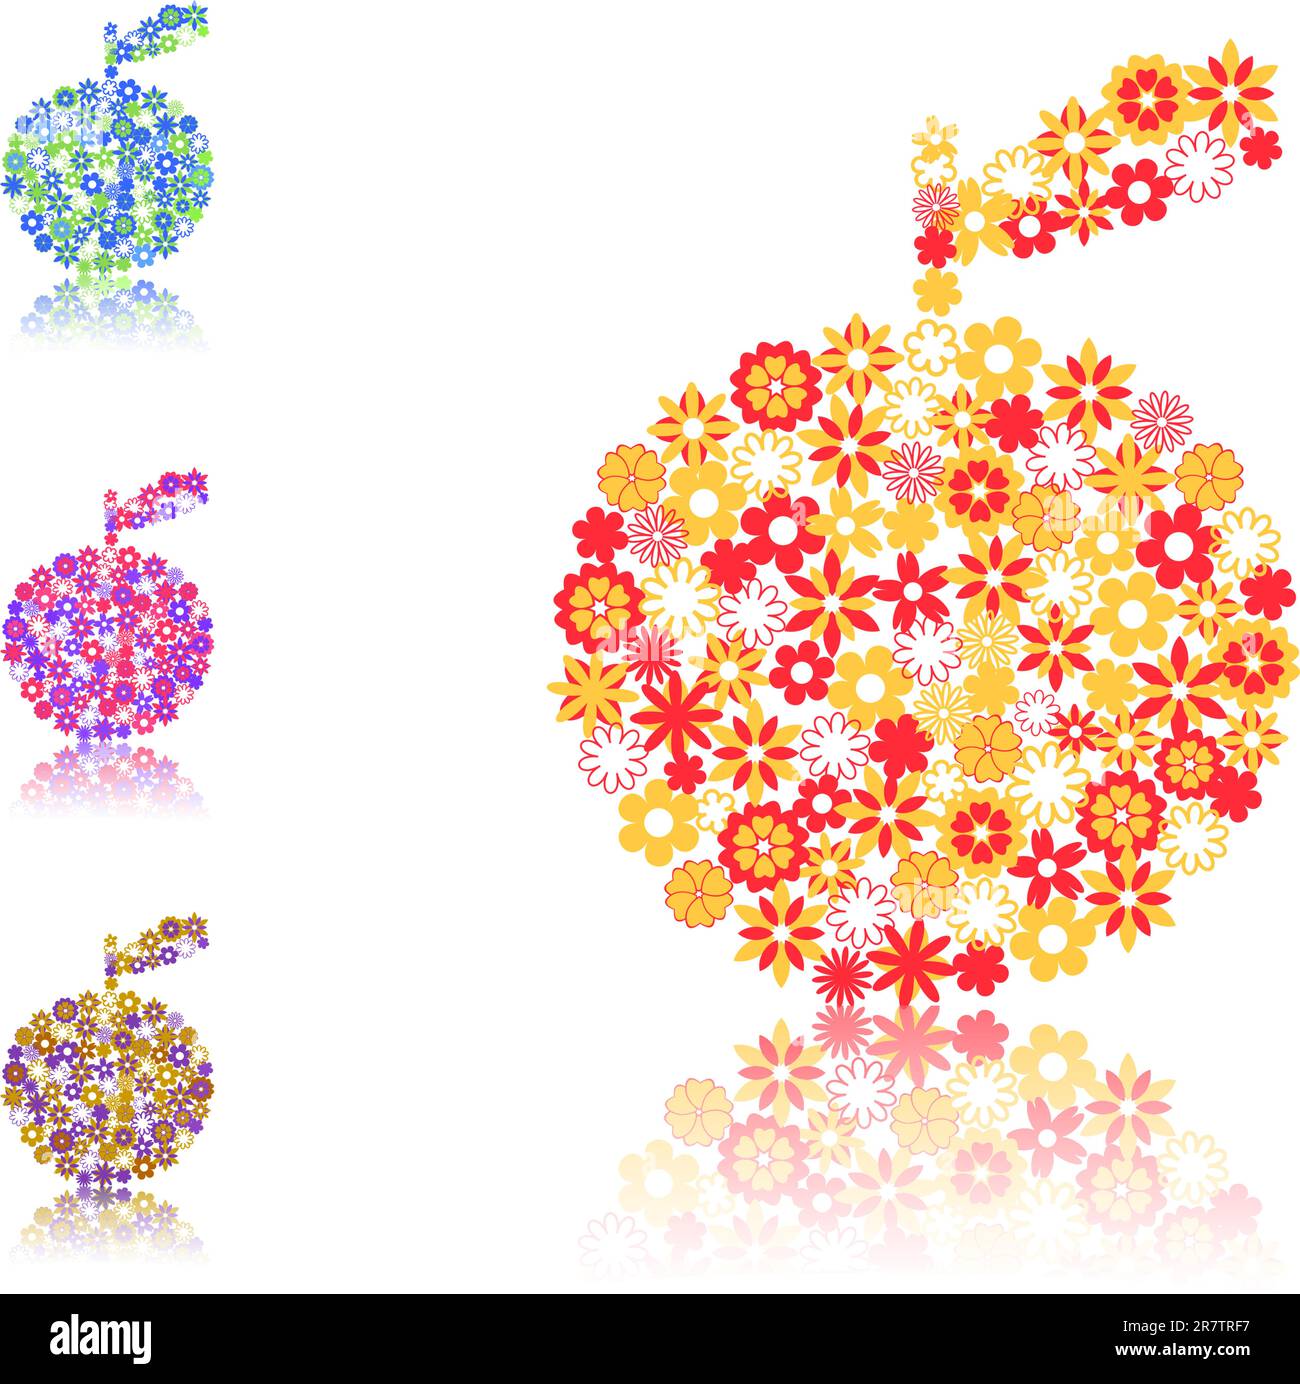 apple silhouette composed of different flowers on white background Stock Vector